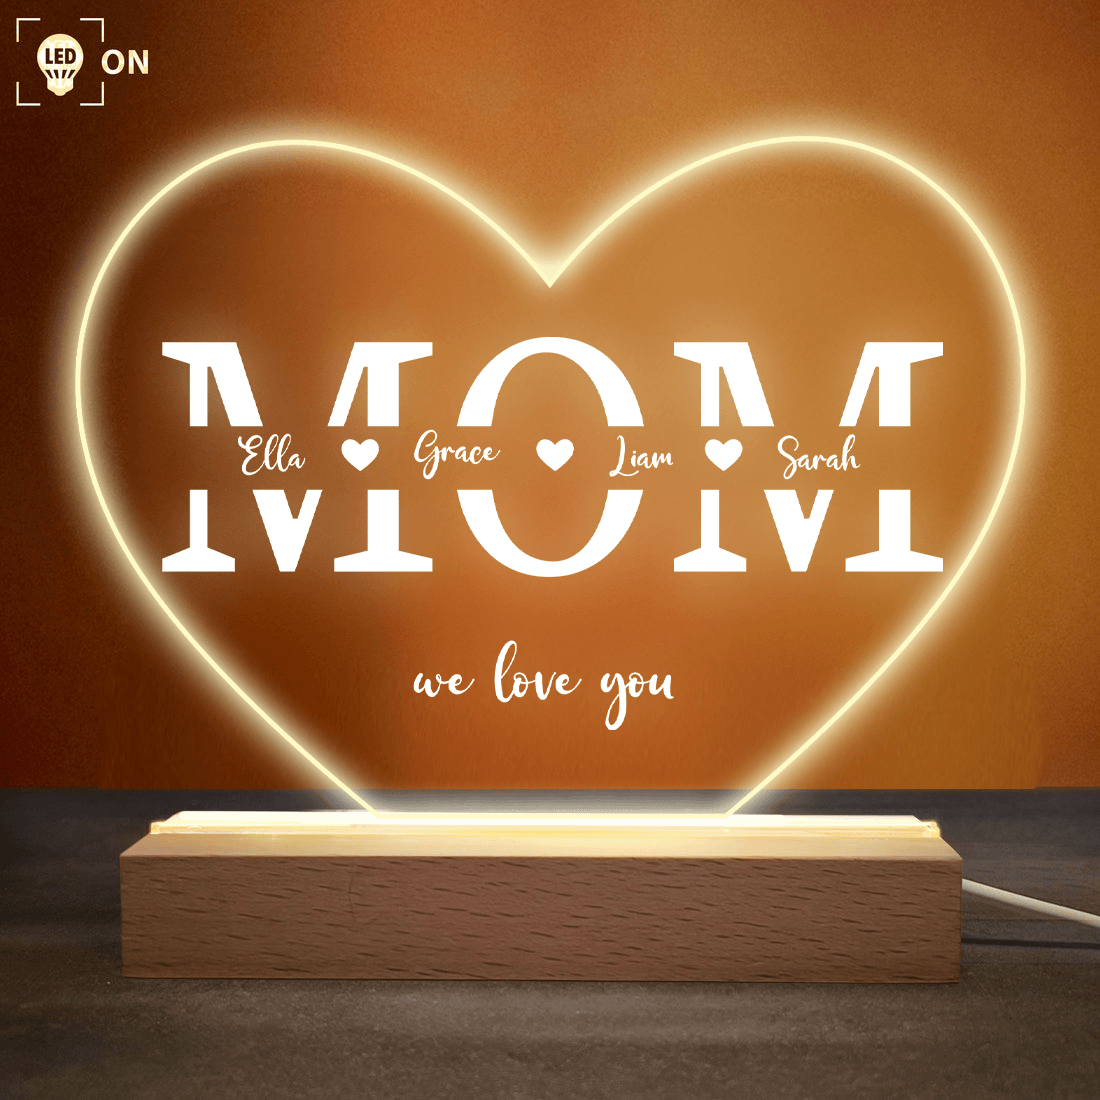 Mom We Love You - Acrylic Plaque Led Lamp - Personalized Gift for Mom - Mother's Day Gift - Suzitee Store